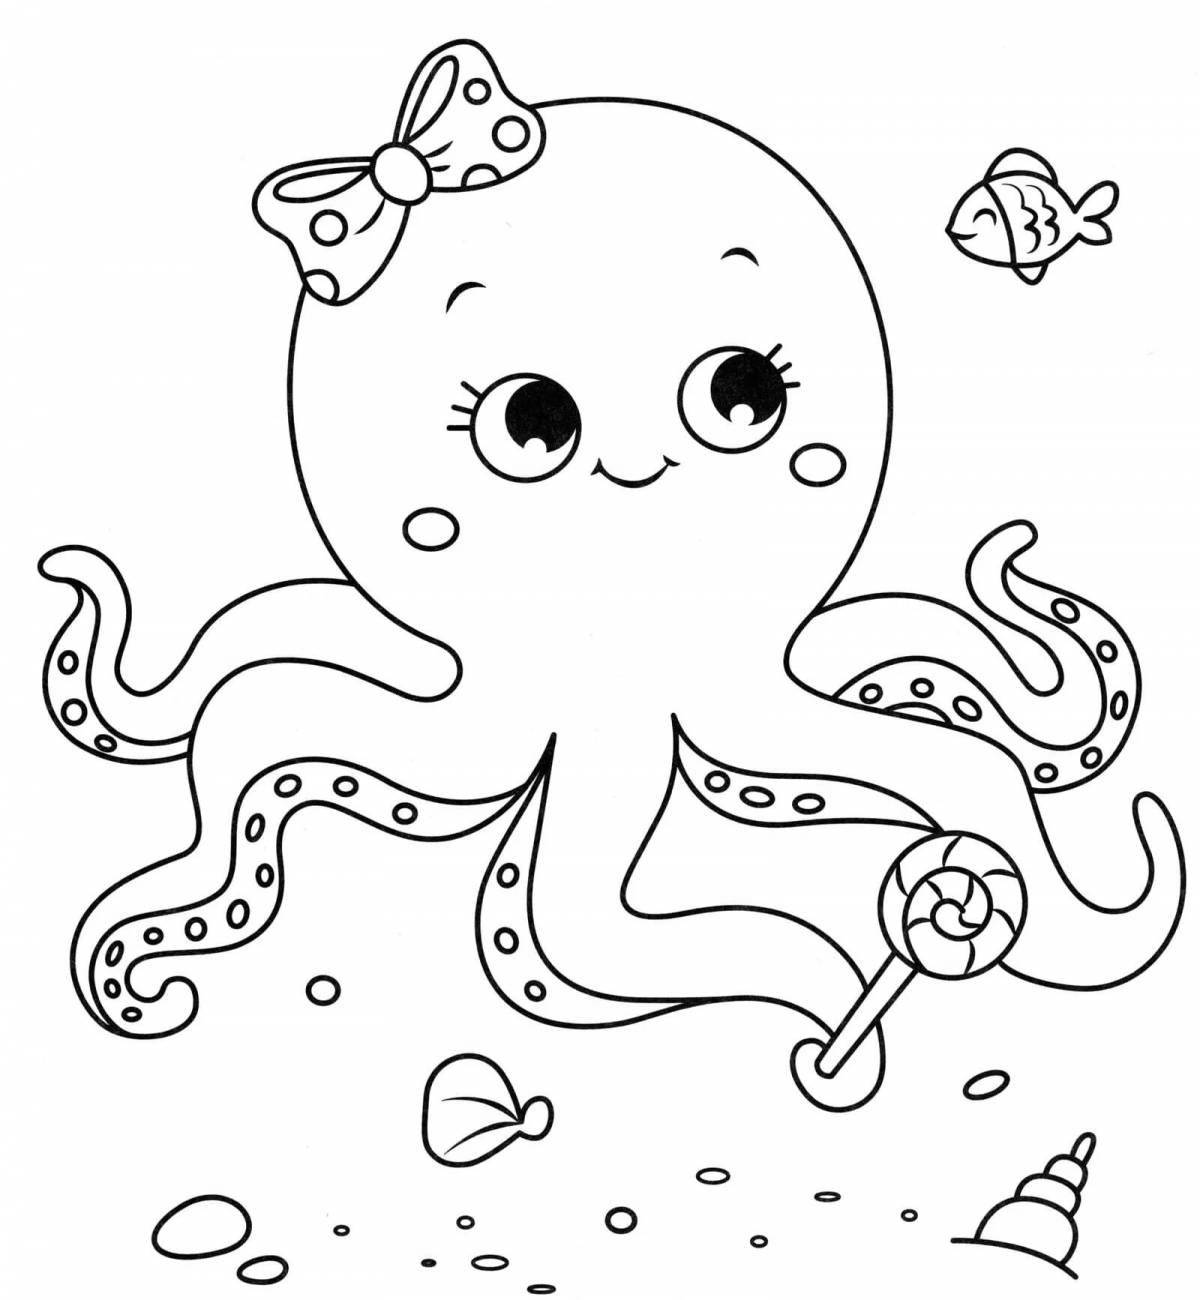 Intricate octopus coloring page